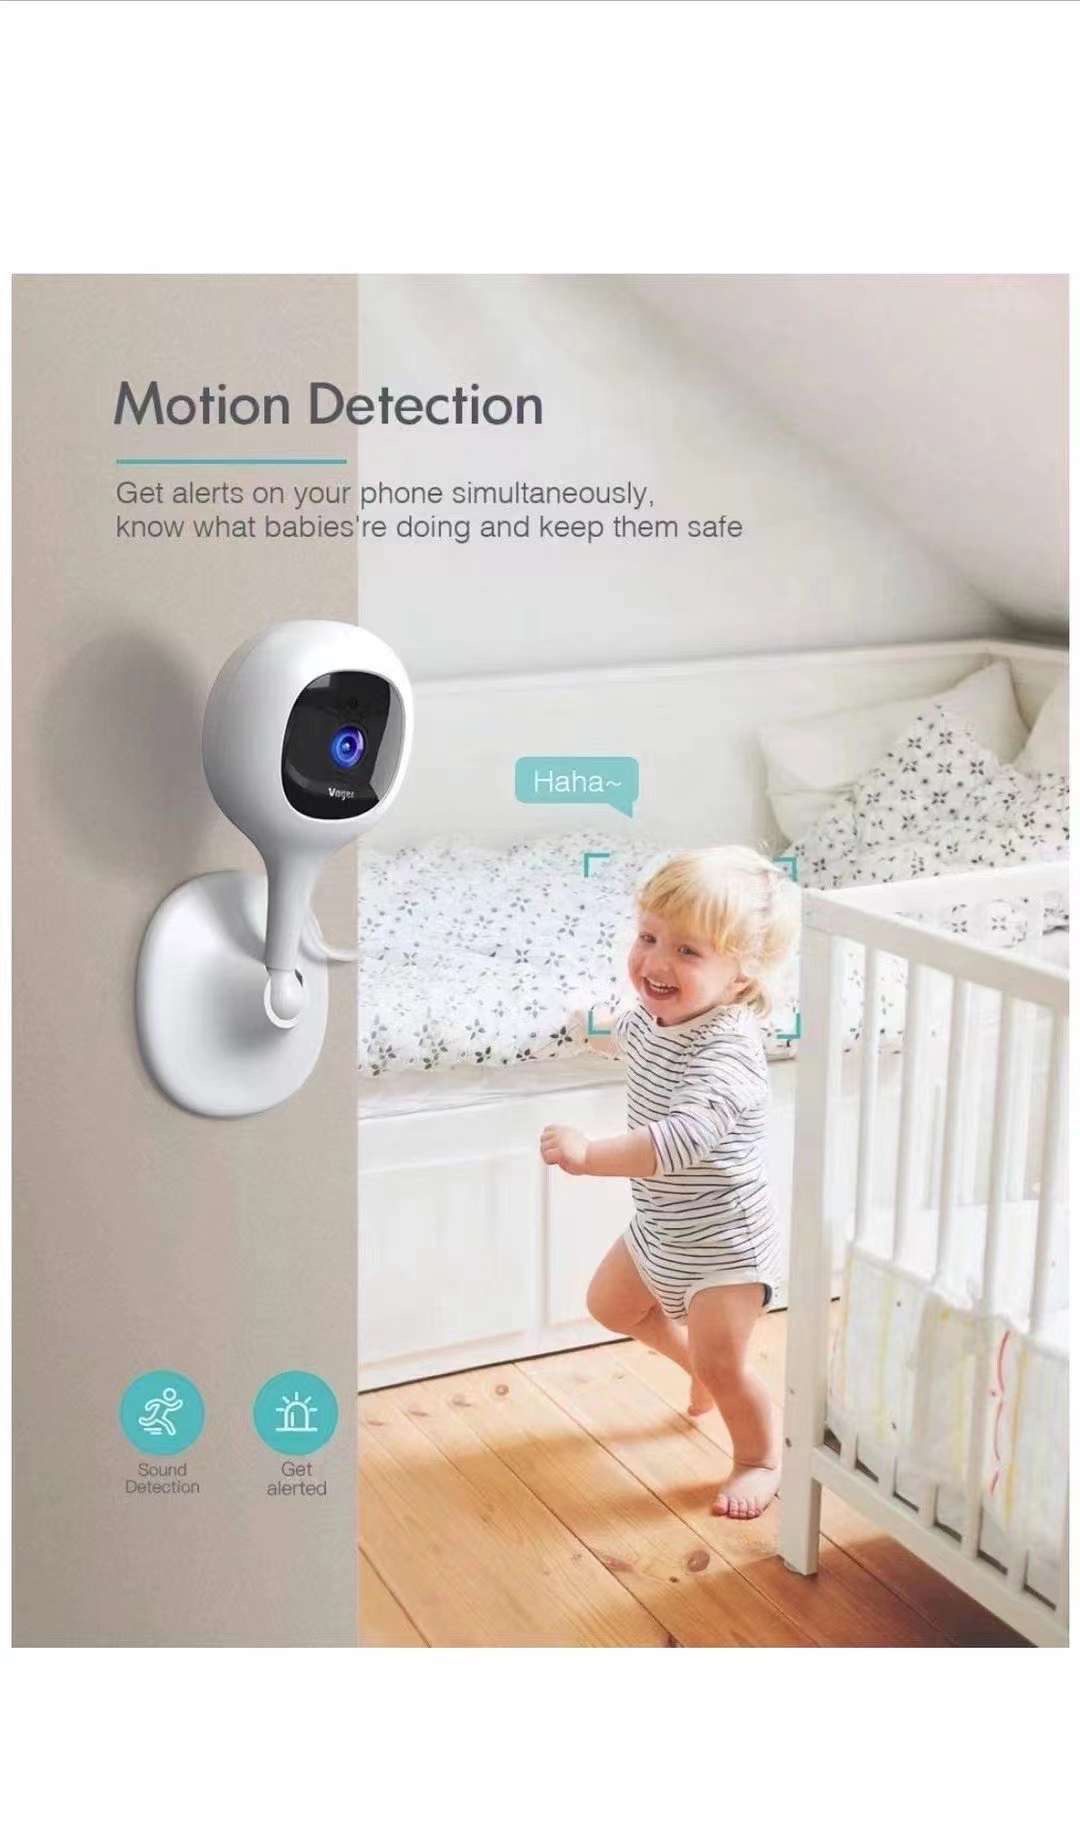 Security Camera Indoor, 1080P WiFi Camera for Baby/Pet/Nanny Motion Detection, Night Vision, Two-Way Audio, Compatible with Alexa/Cloud Service